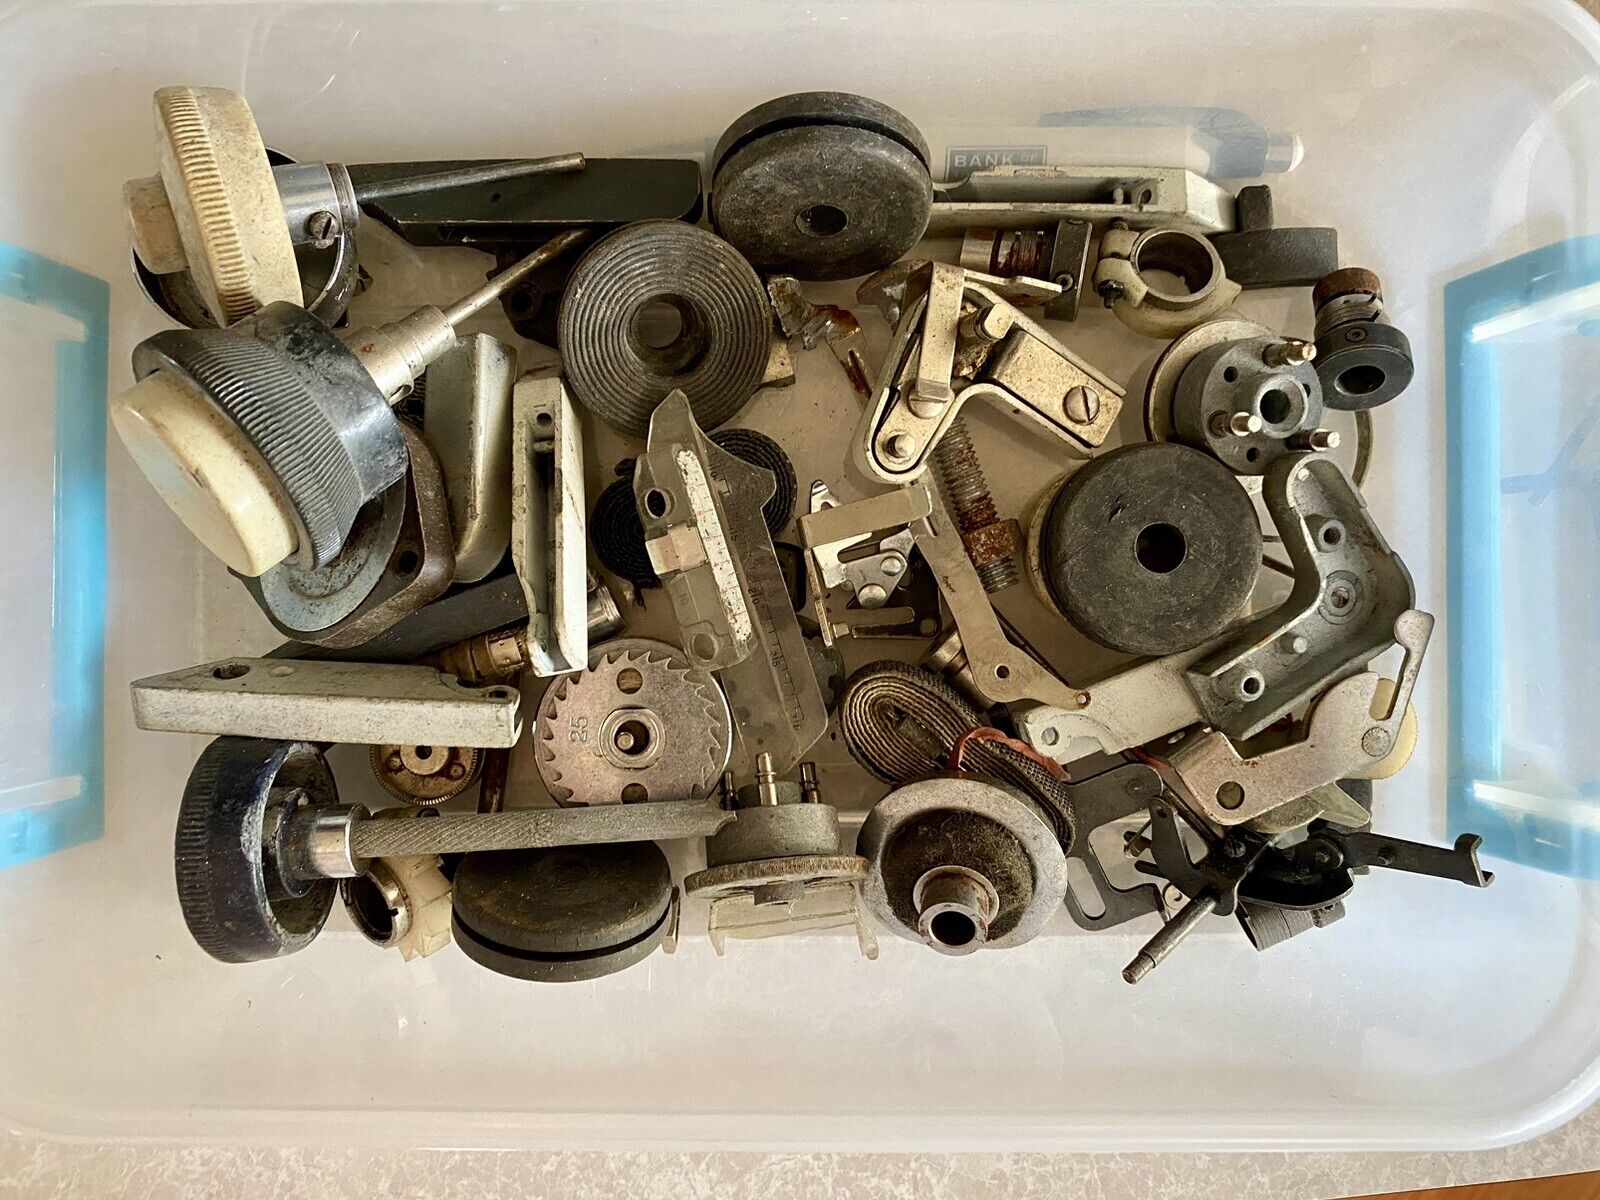 Vintage Typewriter Parts Pieces Repair Kit Nuts Bolts And More 100s Pieces